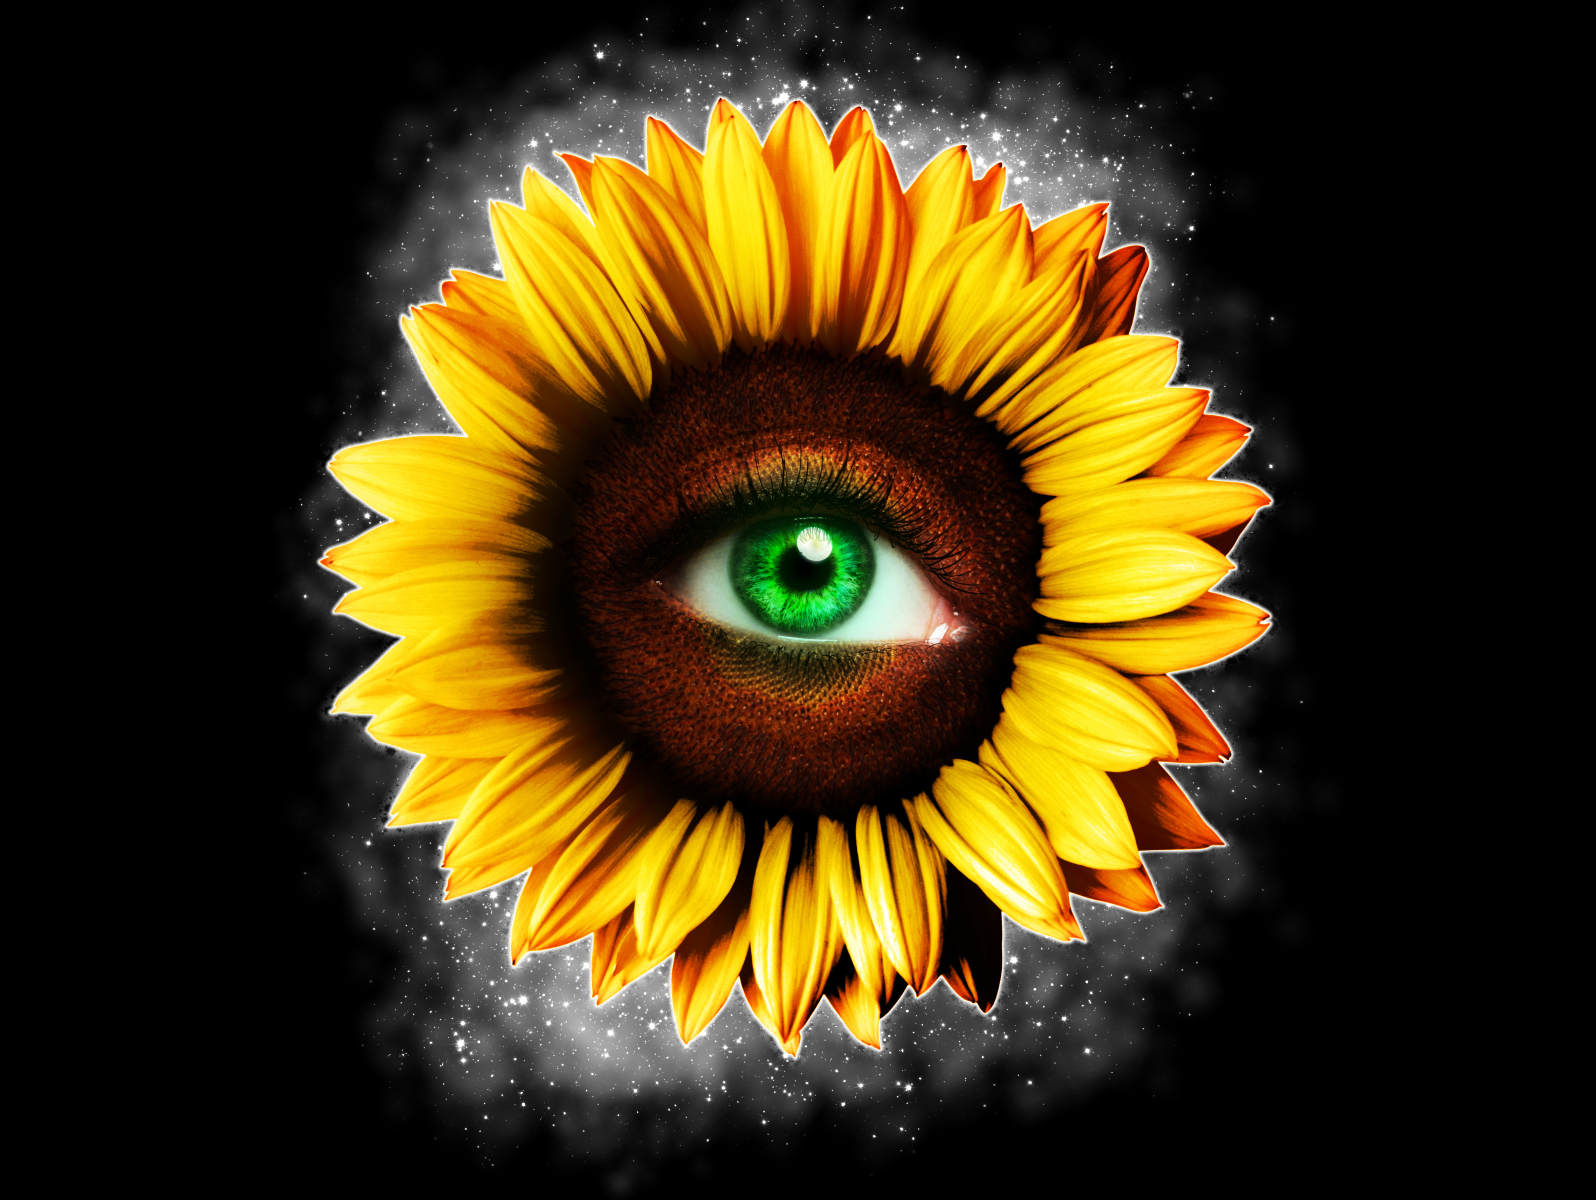 Sunflower Eye by Epic Made on Dribbble